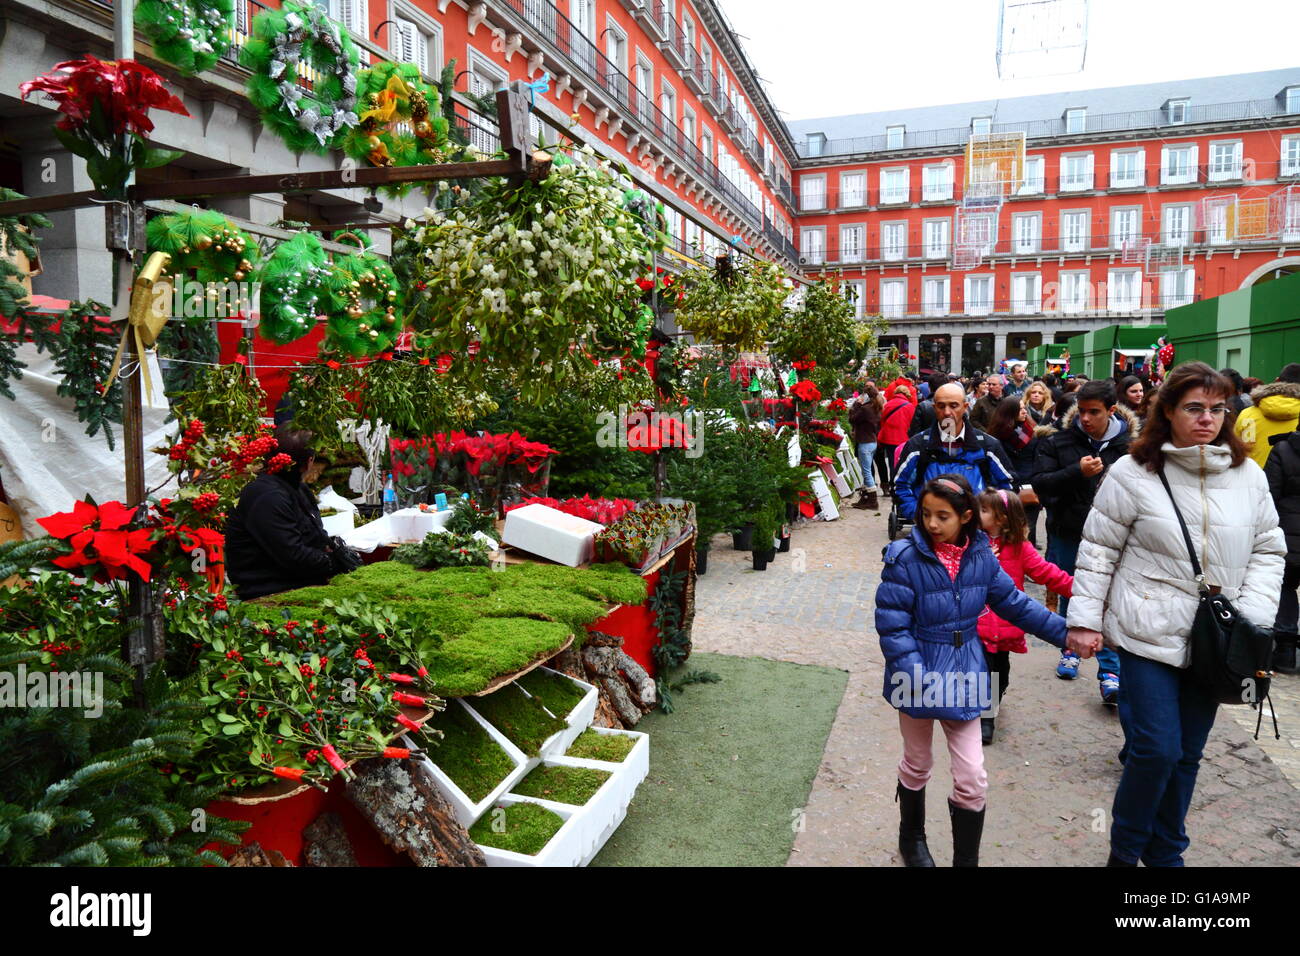 Stall selling holly, mistletoe, decorations and items for making nativity scenes in Christmas market, Plaza Mayor, Madrid, Spain Stock Photo